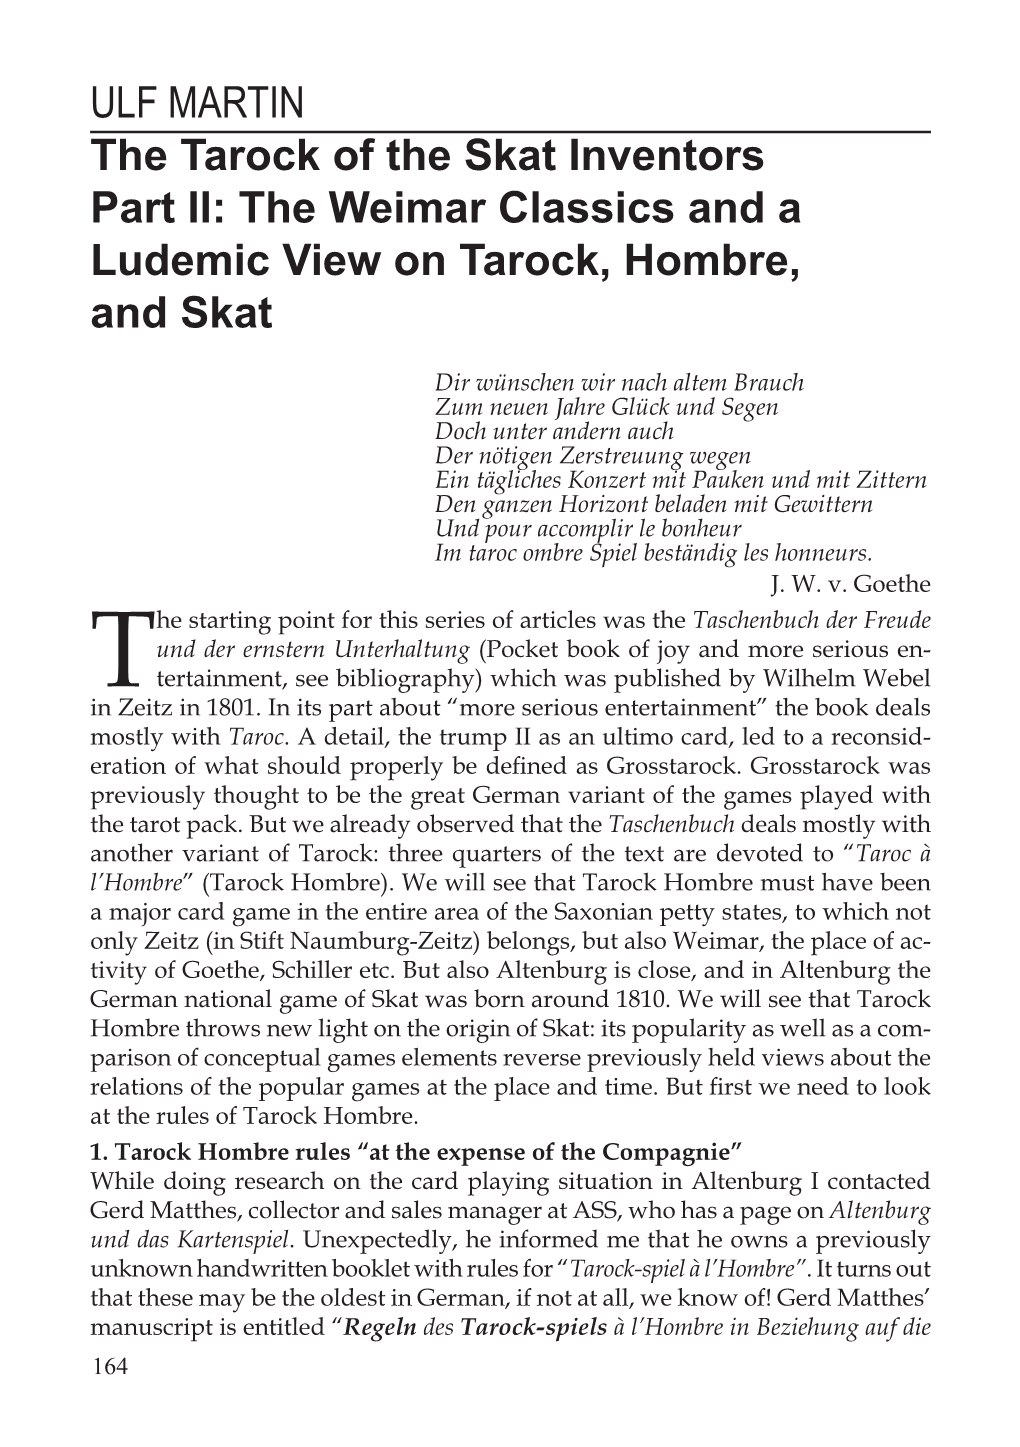 The Weimar Classics and a Ludemic View on Tarock, Hombre, and Skat